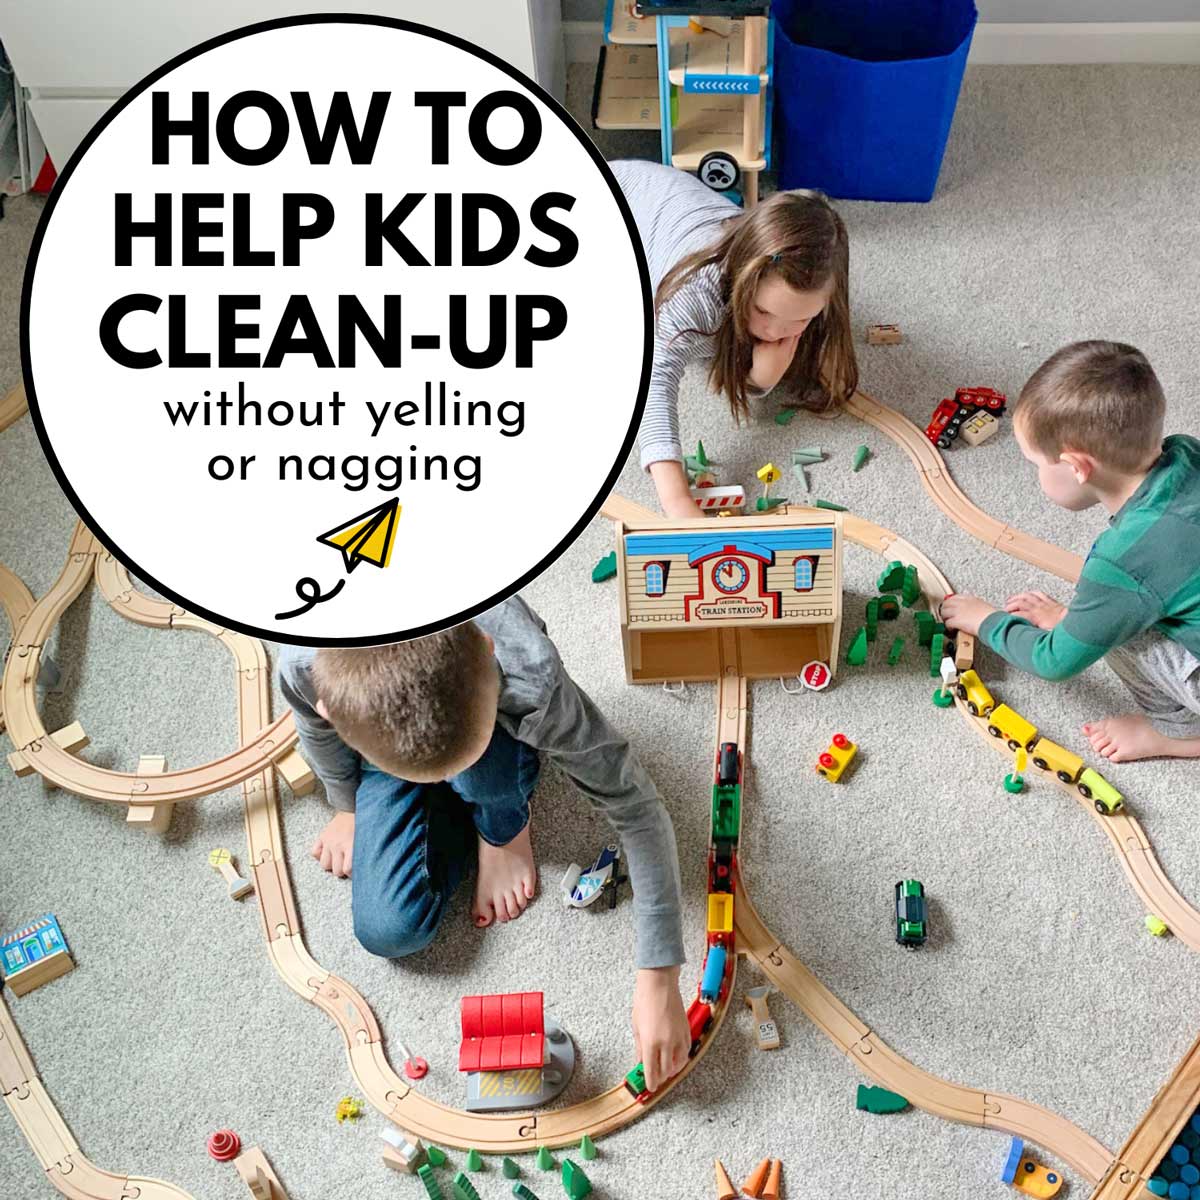 How to help kids clean-up without yelling or nagging: image shows three kids on gray carpet playing with trains.